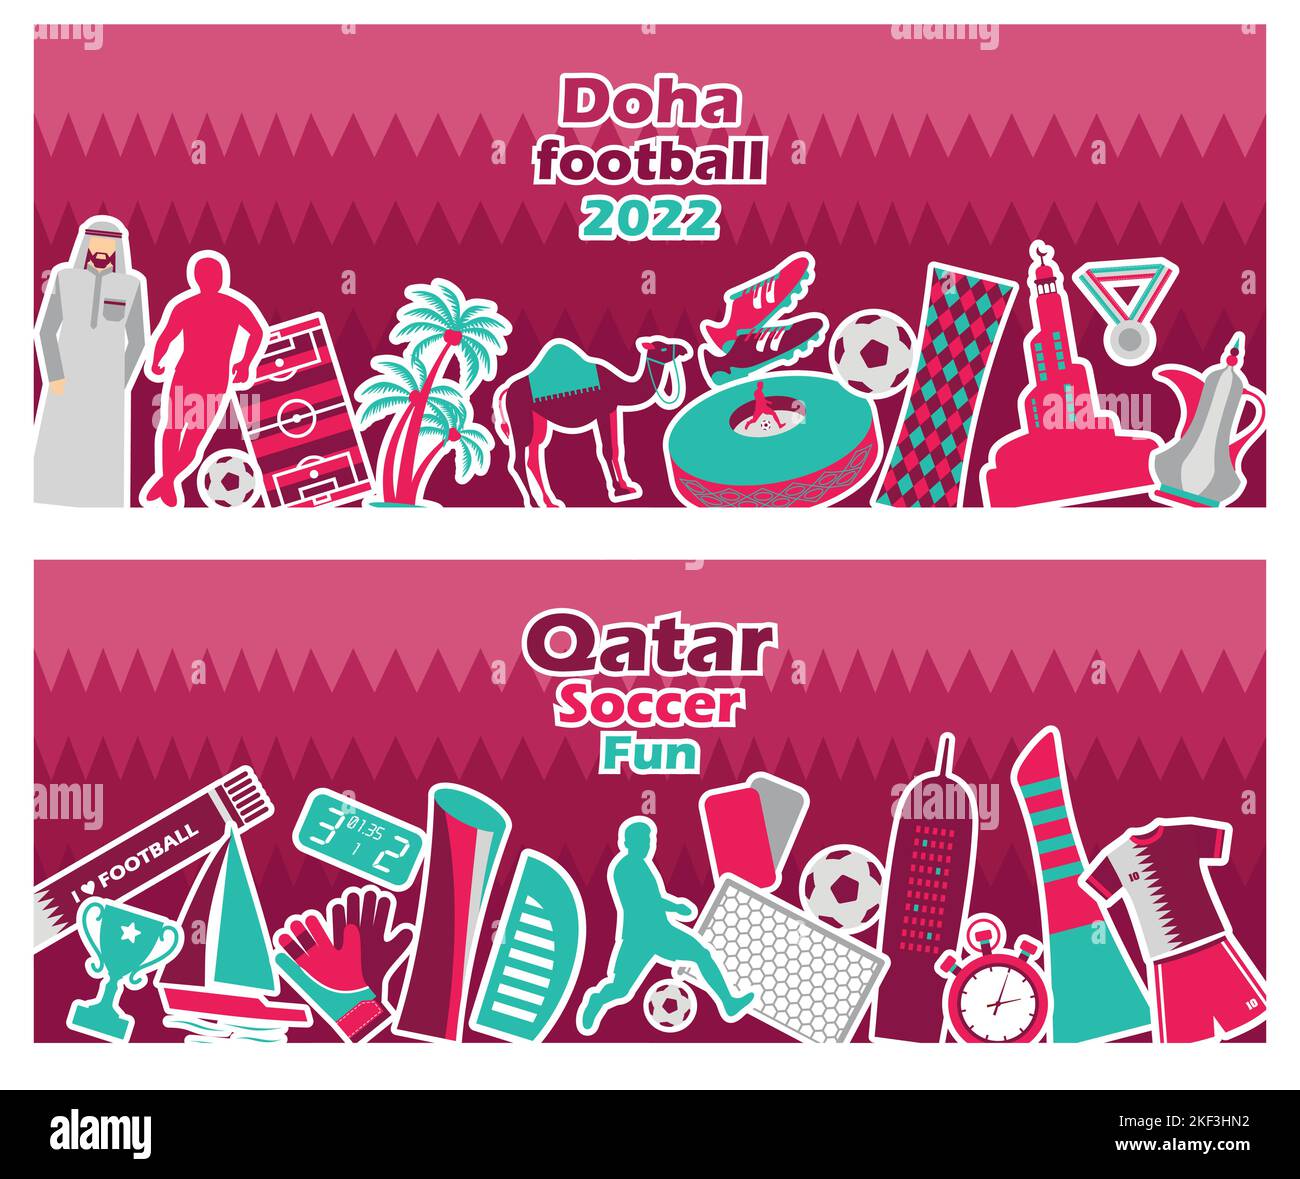 Football sports competition, Qatar tourist icon set on banners. Doha background in color national flag. National day. Middle eastern football. Stock Vector